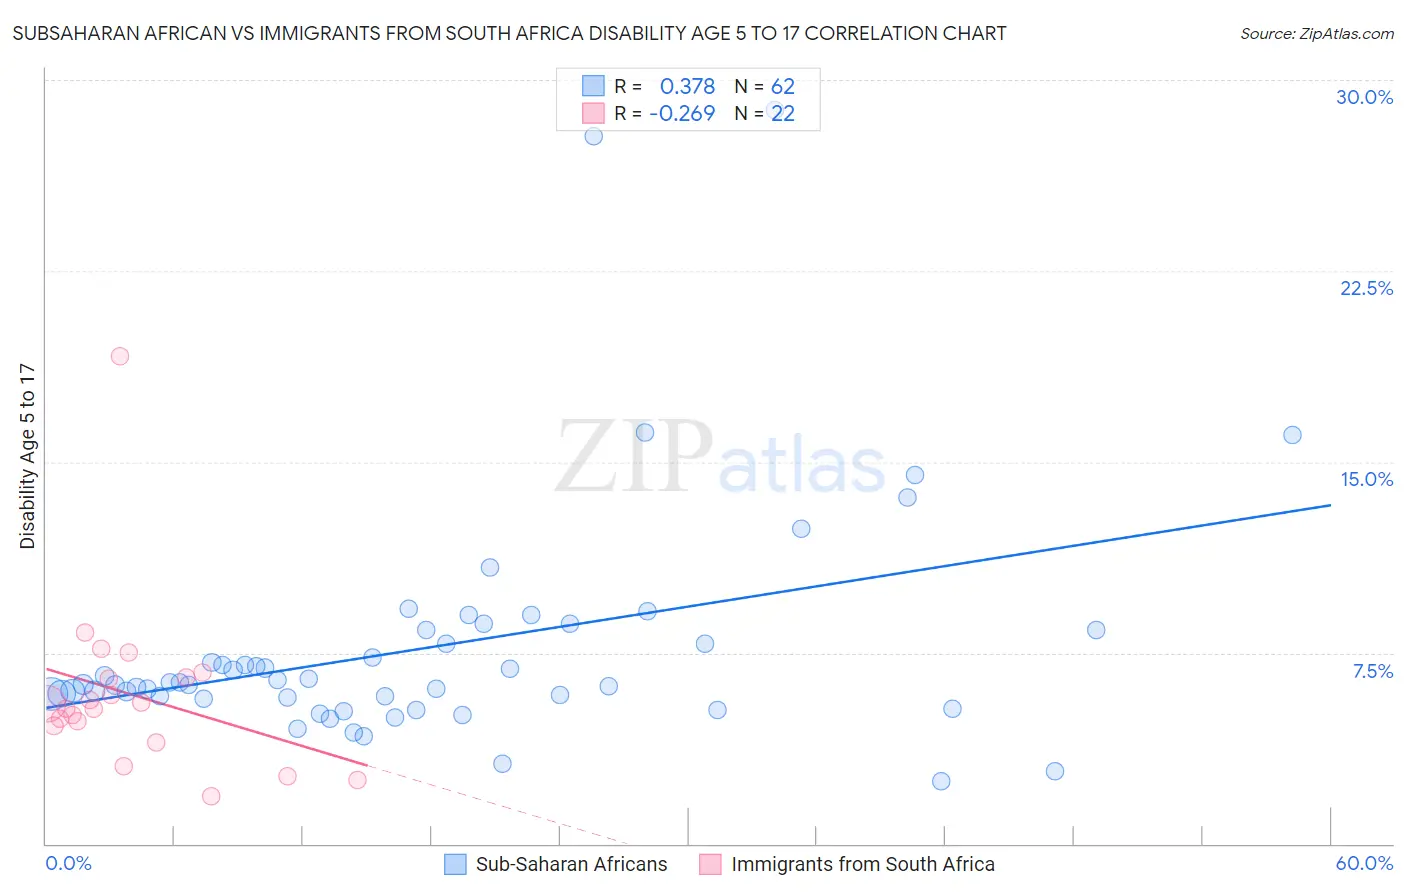 Subsaharan African vs Immigrants from South Africa Disability Age 5 to 17